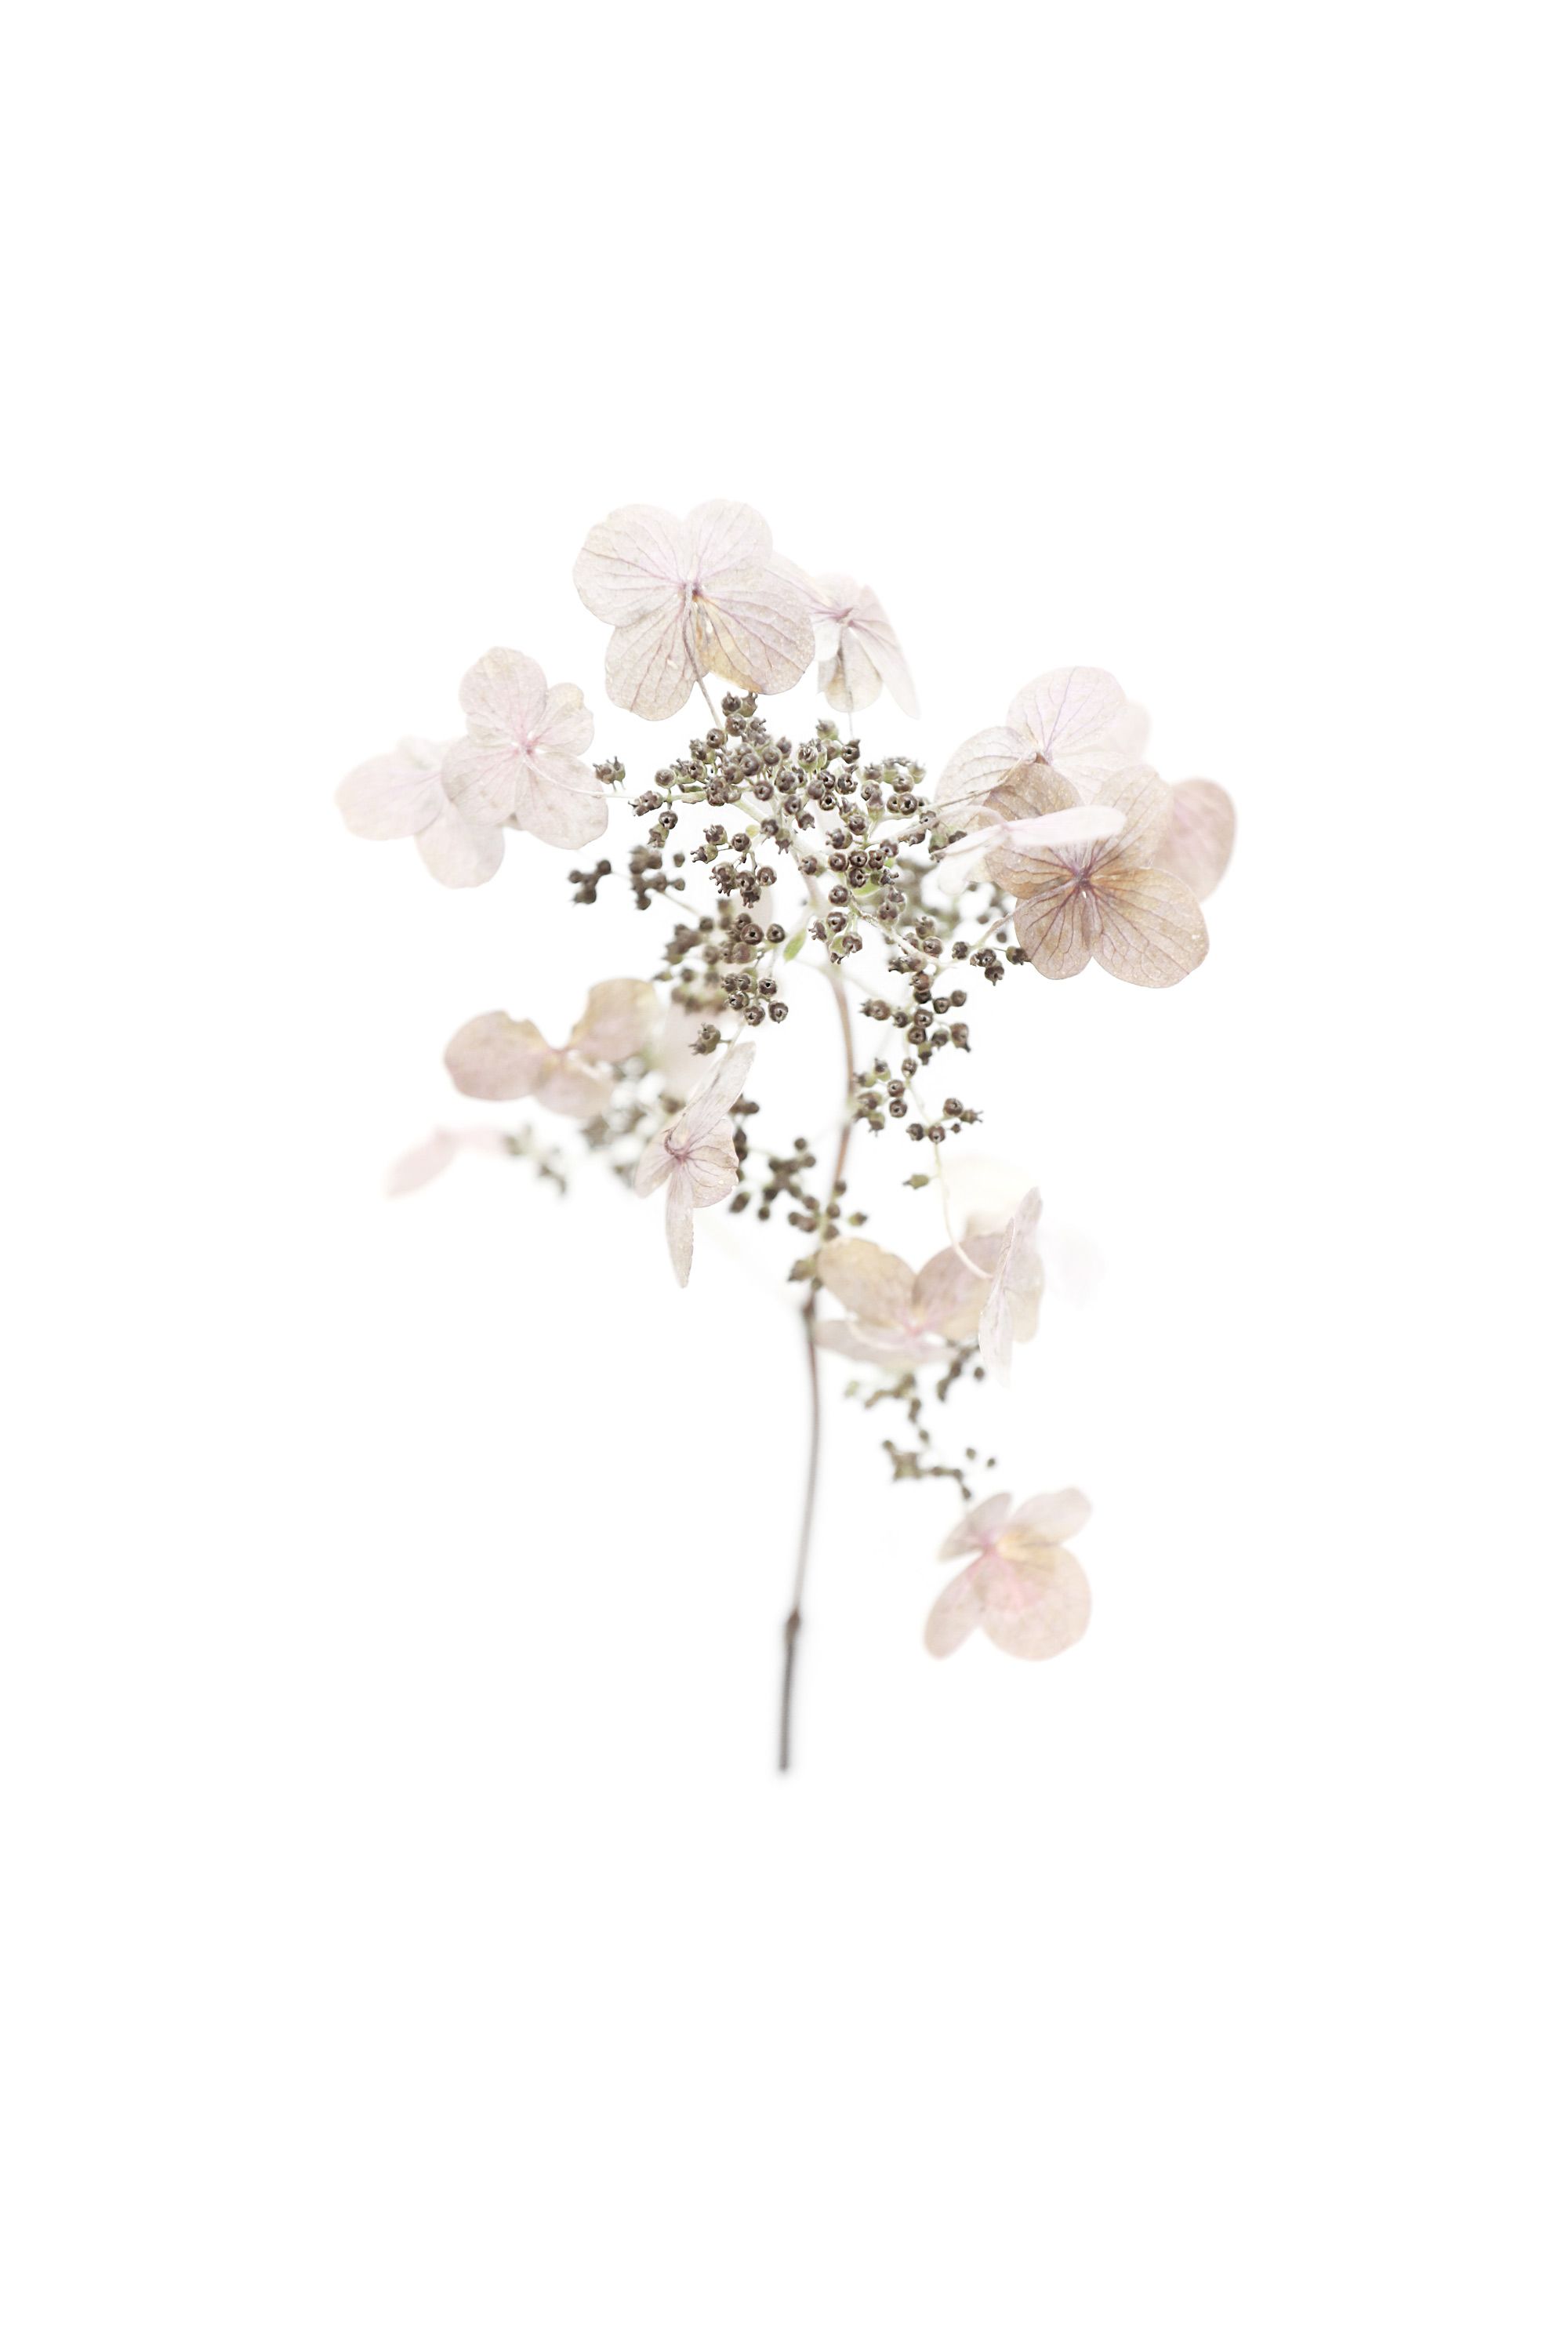 Dried Flowers Wallpaper Free Dried Flowers Background